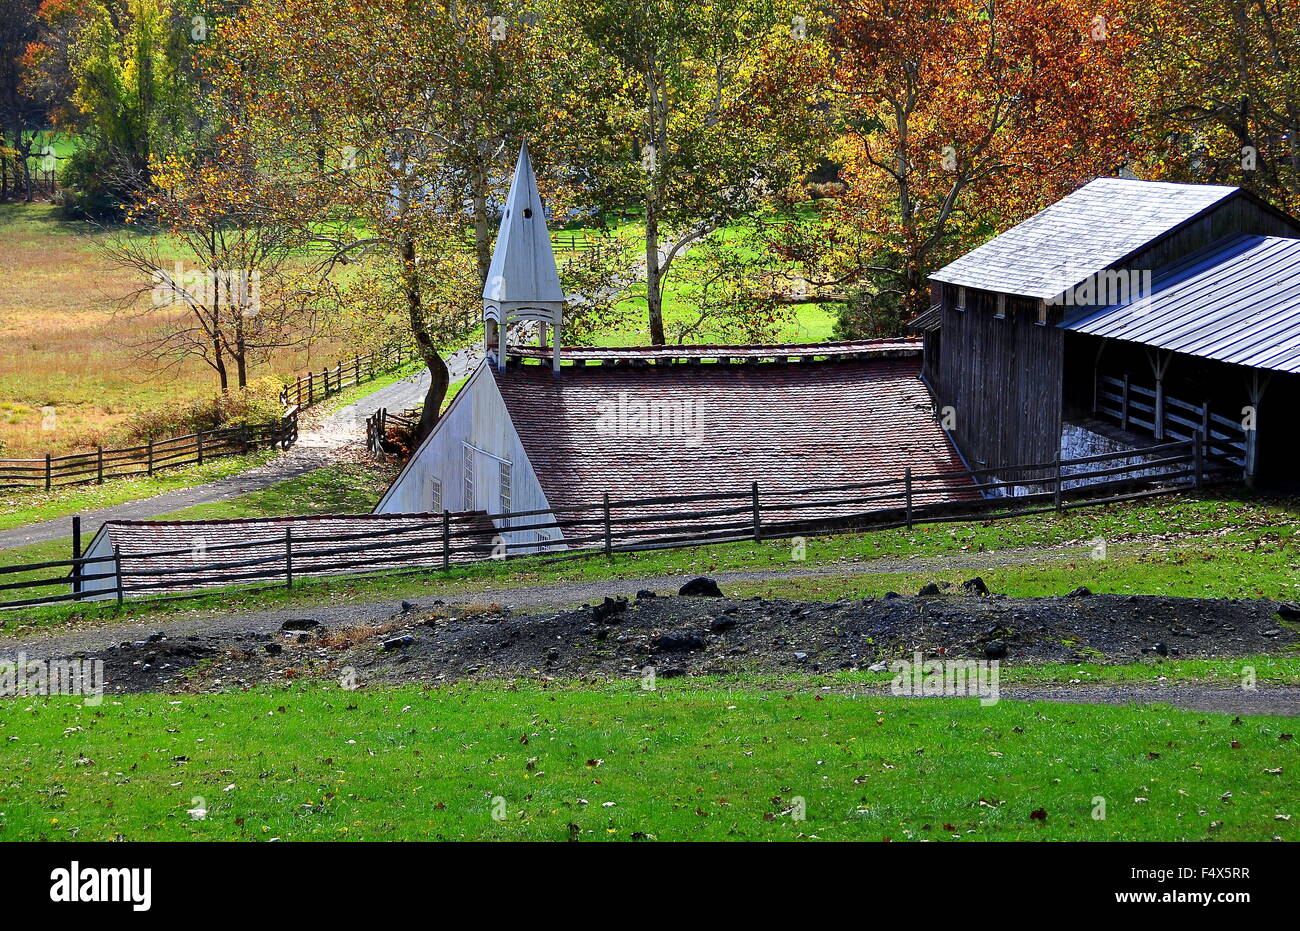 Hopewell Furnace, Pennsylvania:  The Cast House with its distinctive wooden roof cupola at Hopewell Furnace Nat'l Hist. Park Stock Photo